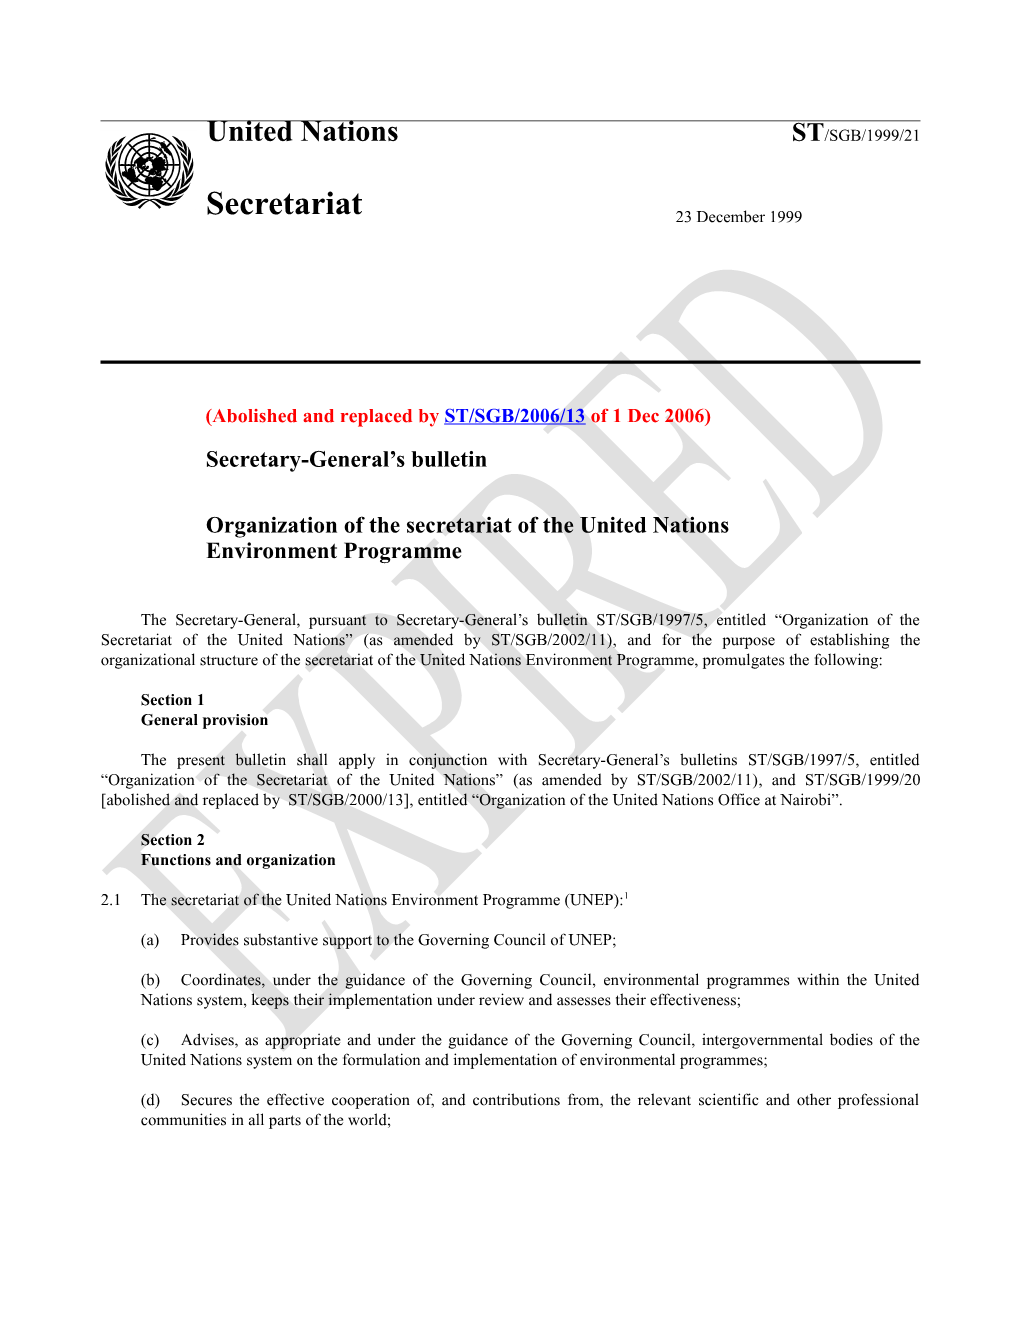 Organization of the Secretariat of the United Nations Environment Programme